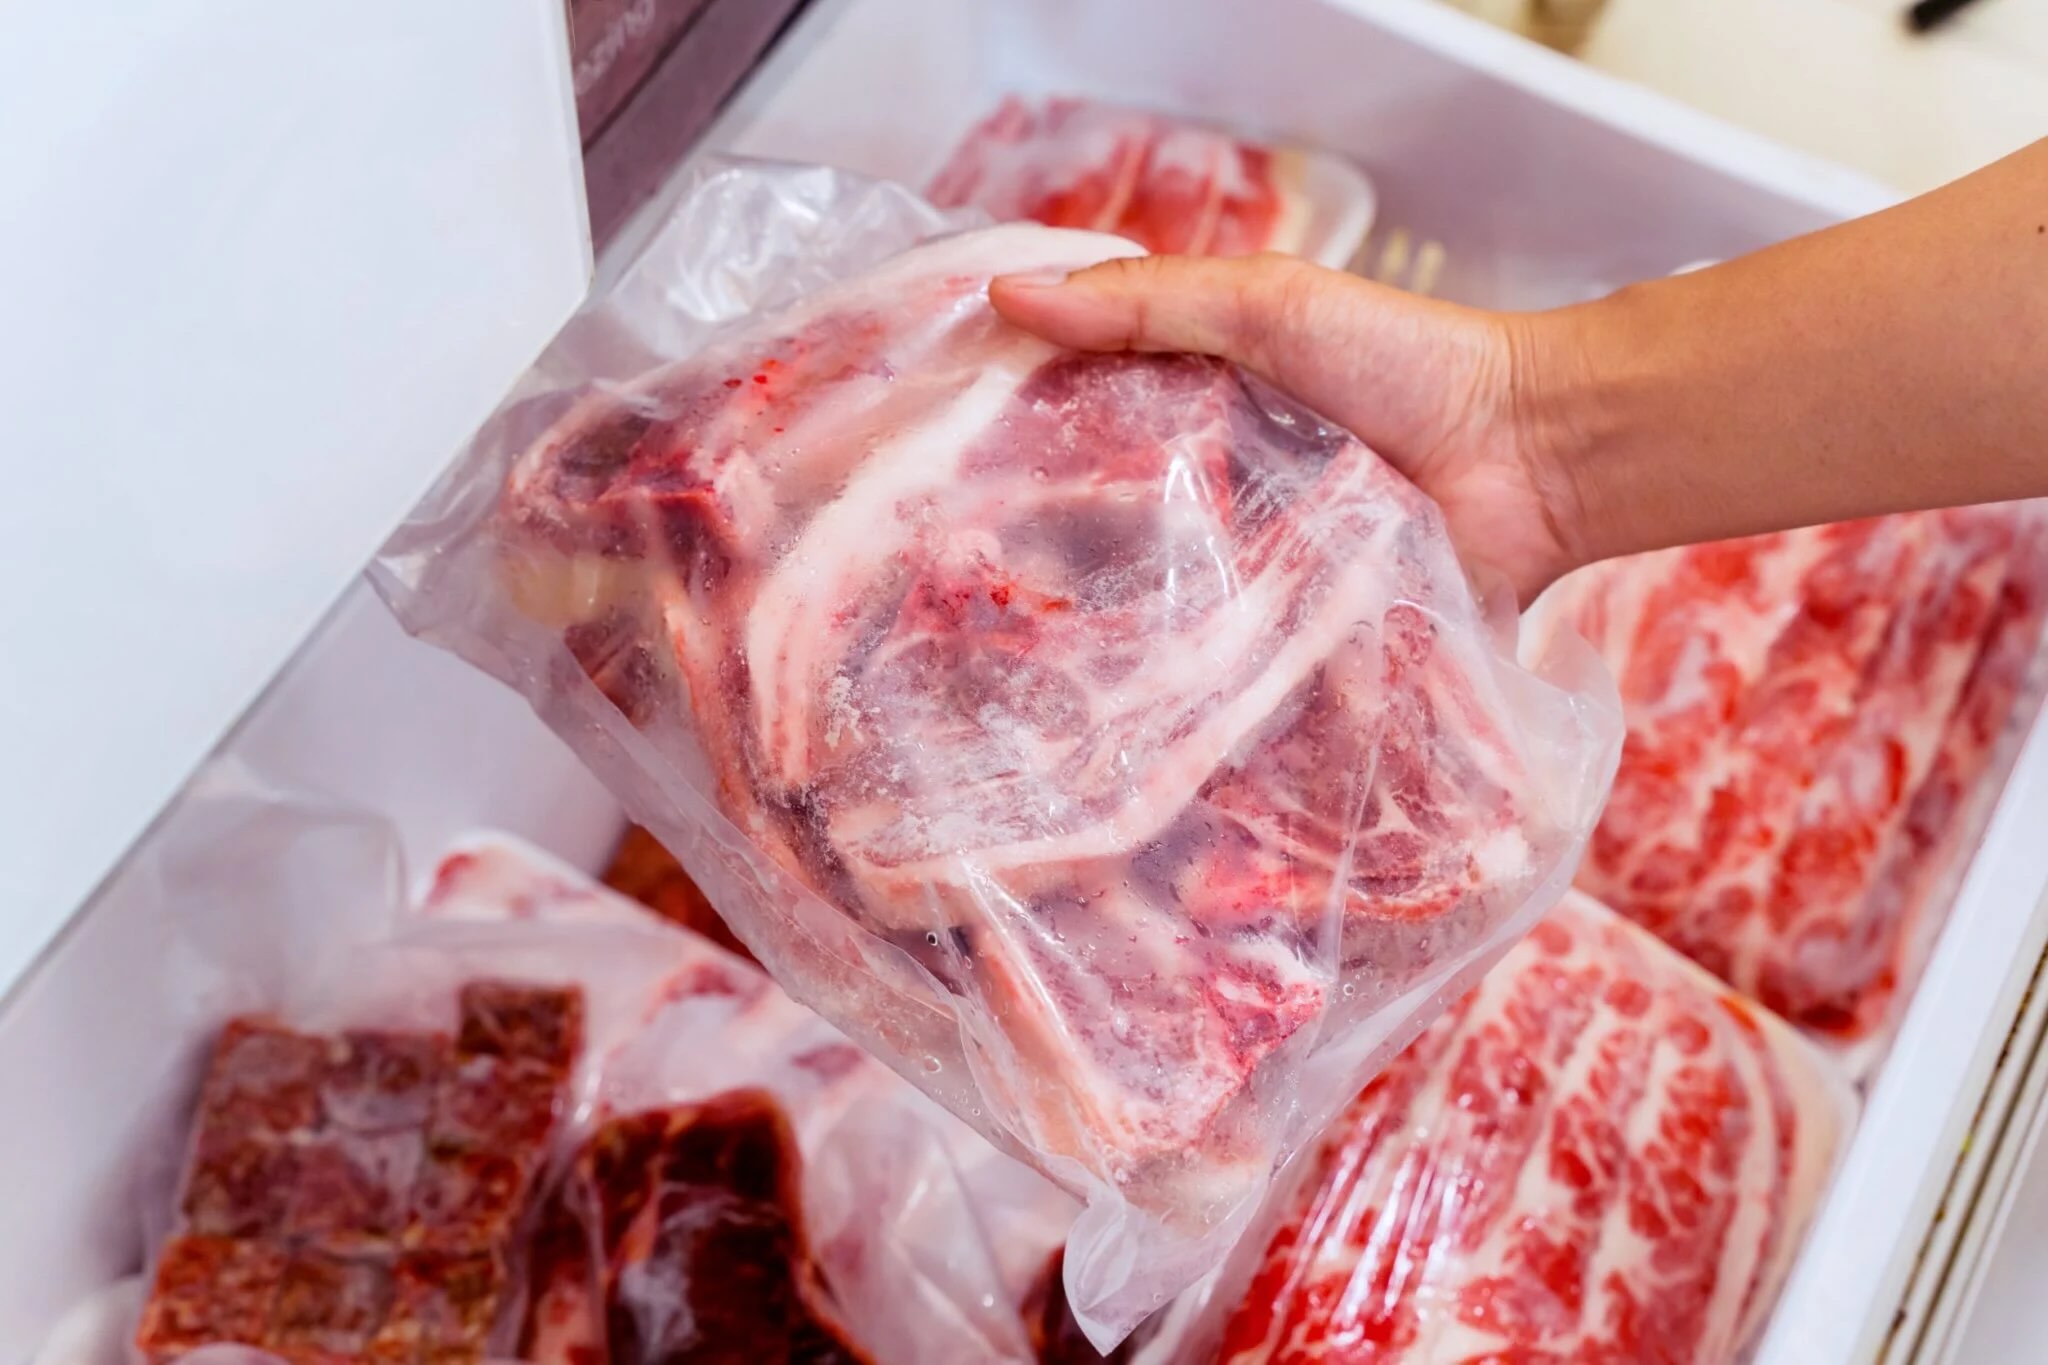 How To Store Raw Meat After Opening